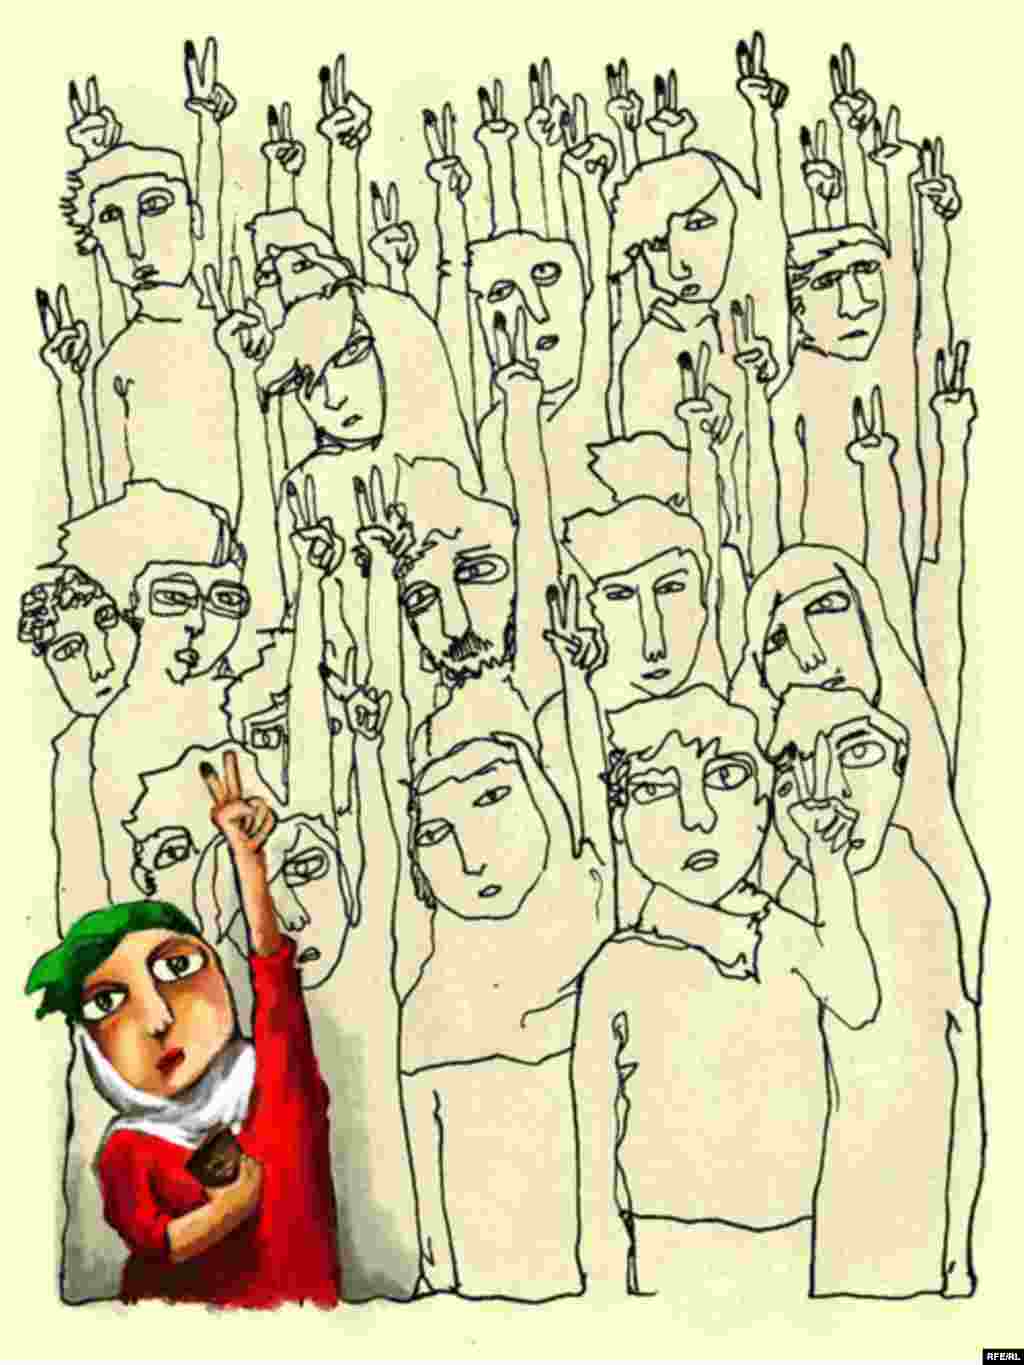 Iran's Election Unrest: An Artist's View #2